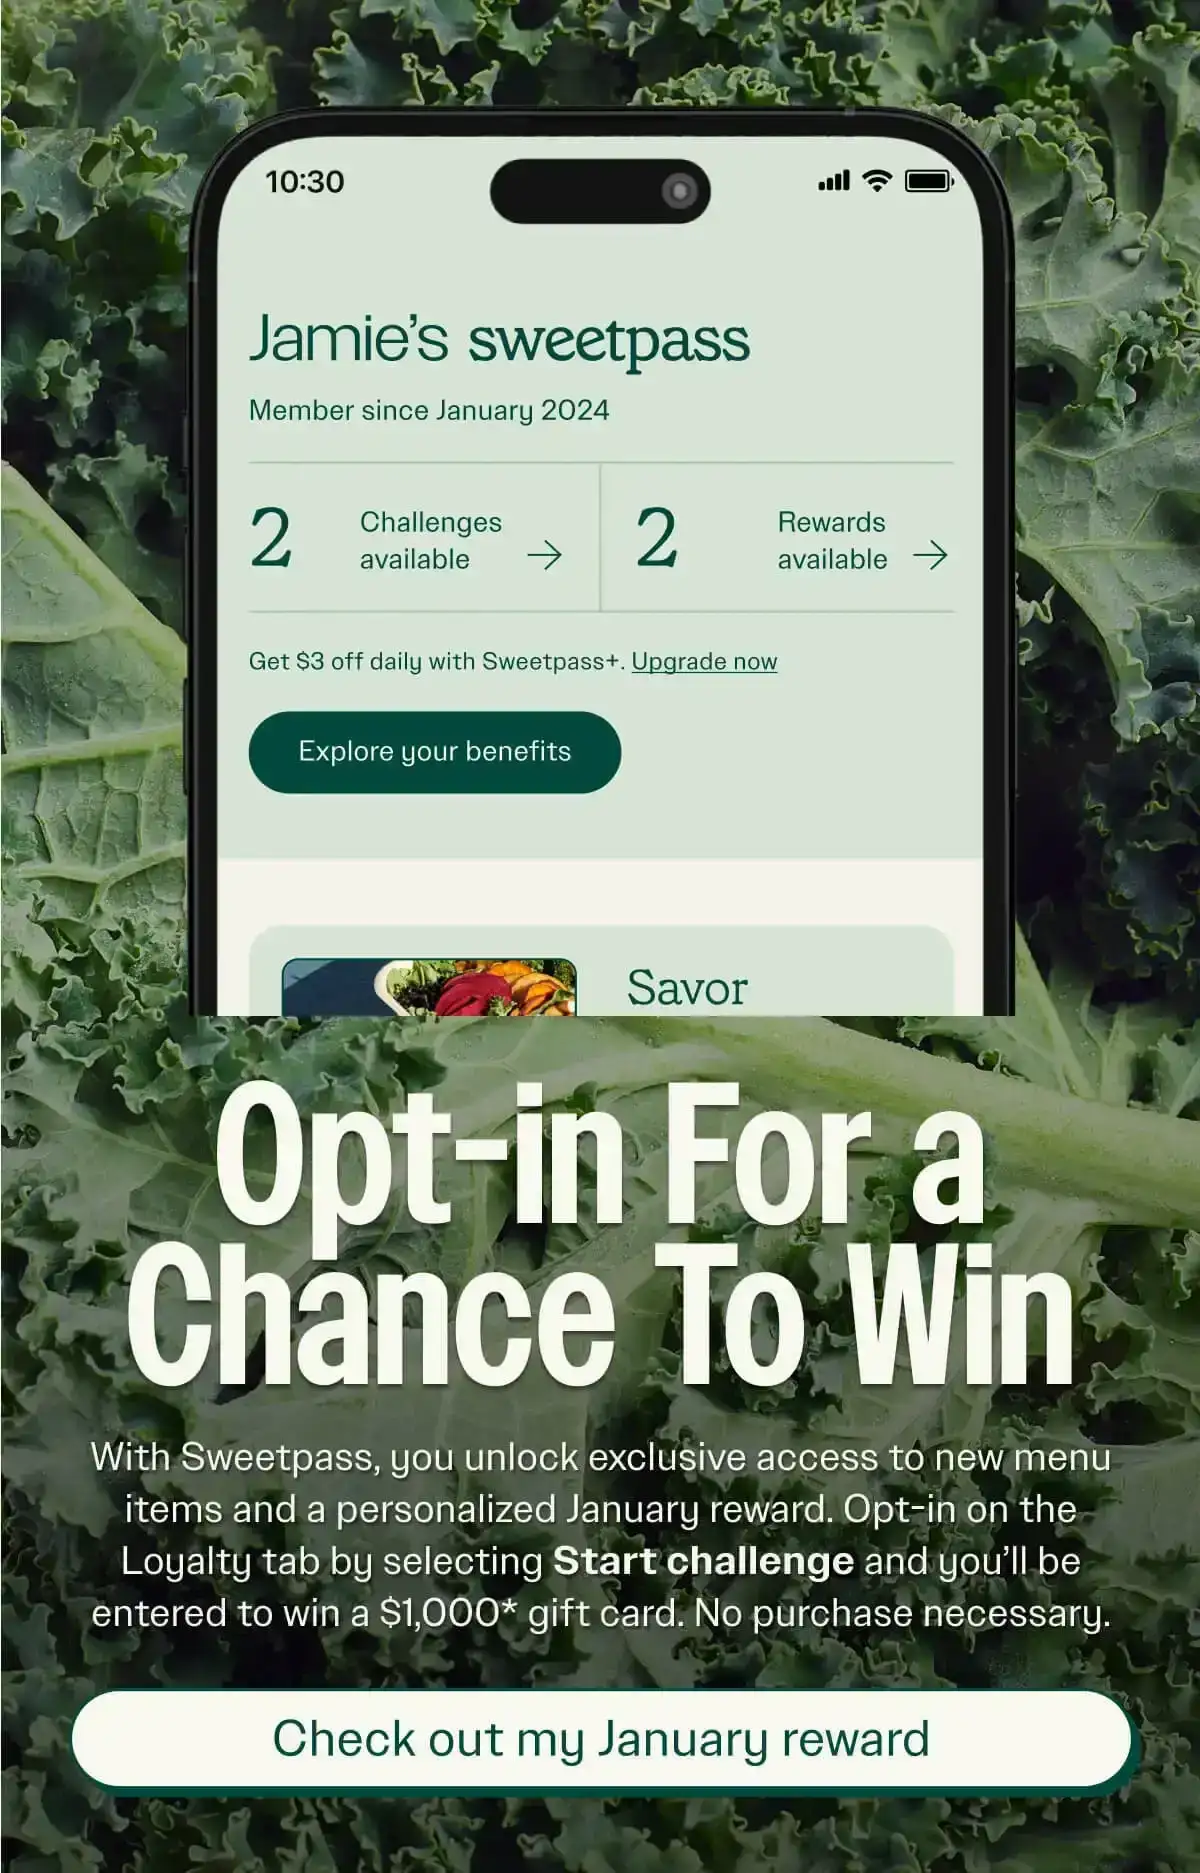 Opt-in for a chance to win